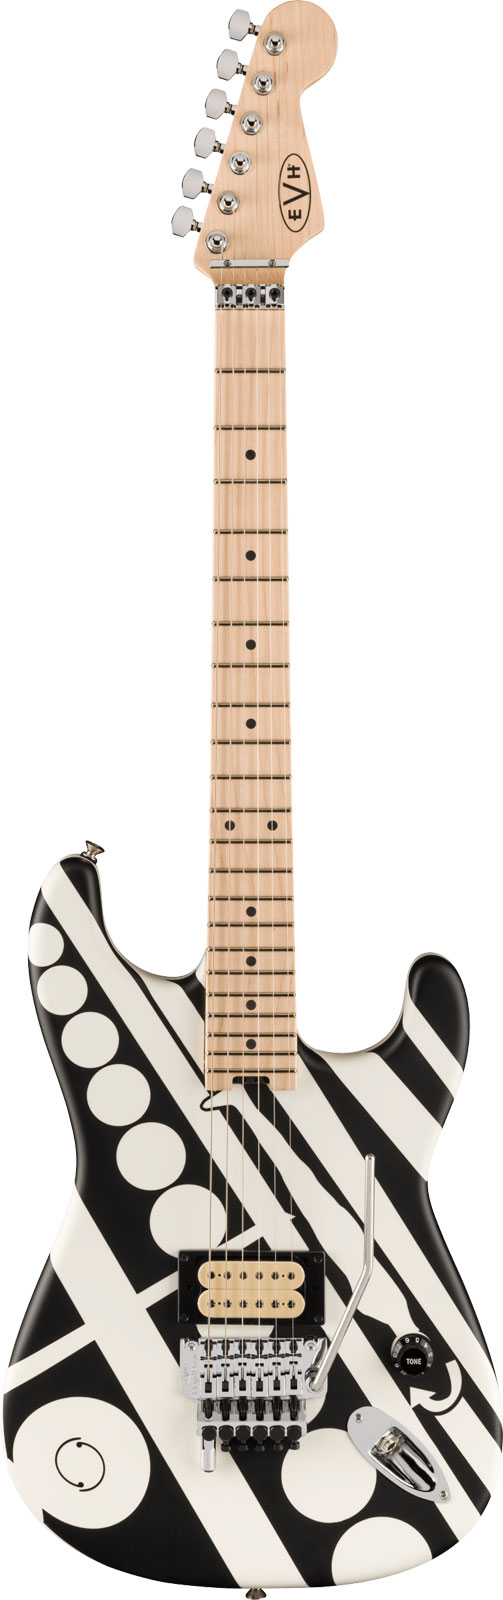 EVH EVH STRIPED SERIES CIRCLES, MAPLE FINGERBOARD, WHITE AND BLACK